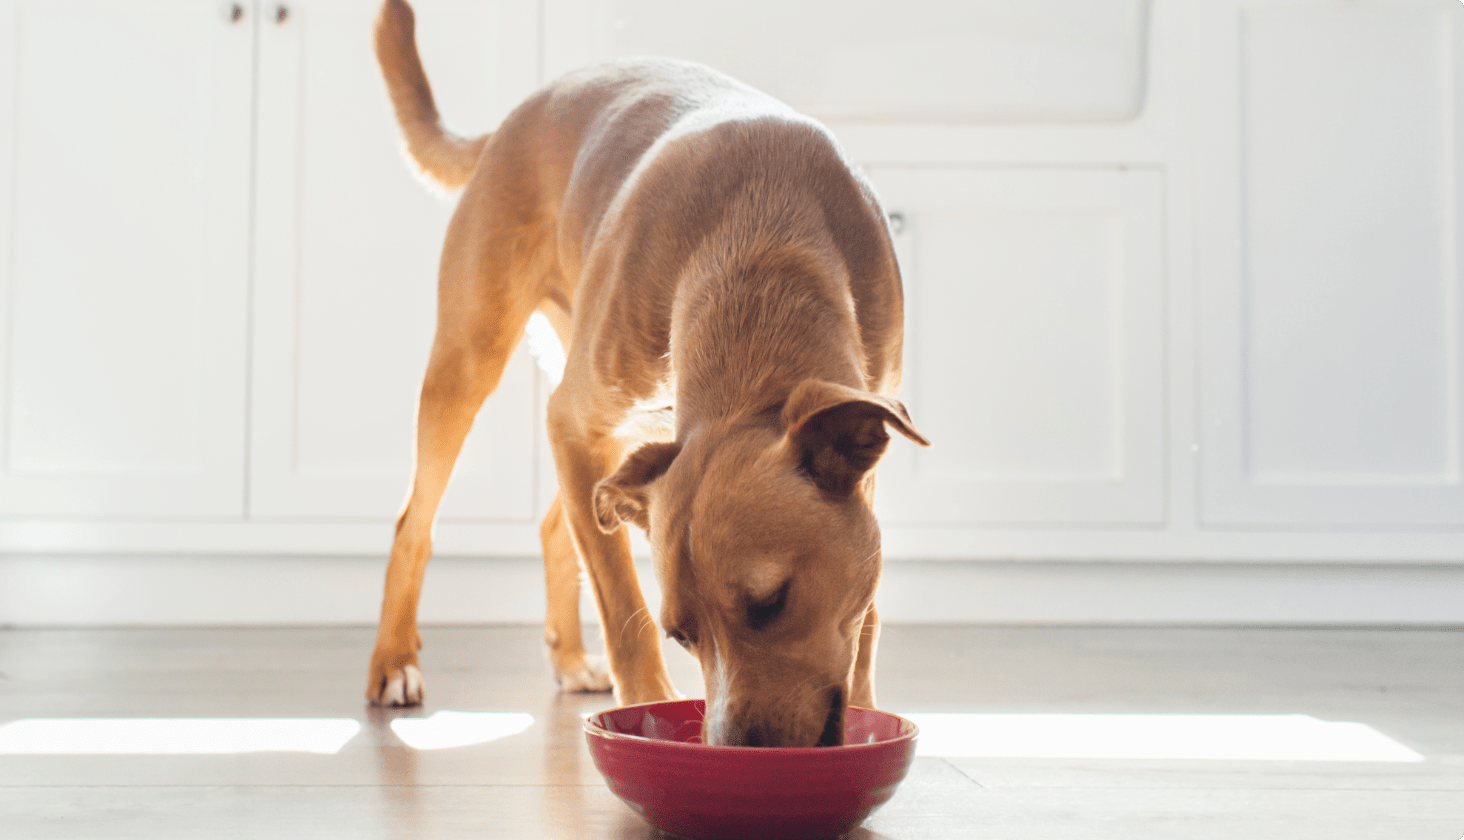 A dog happily eating food out of a bowl.